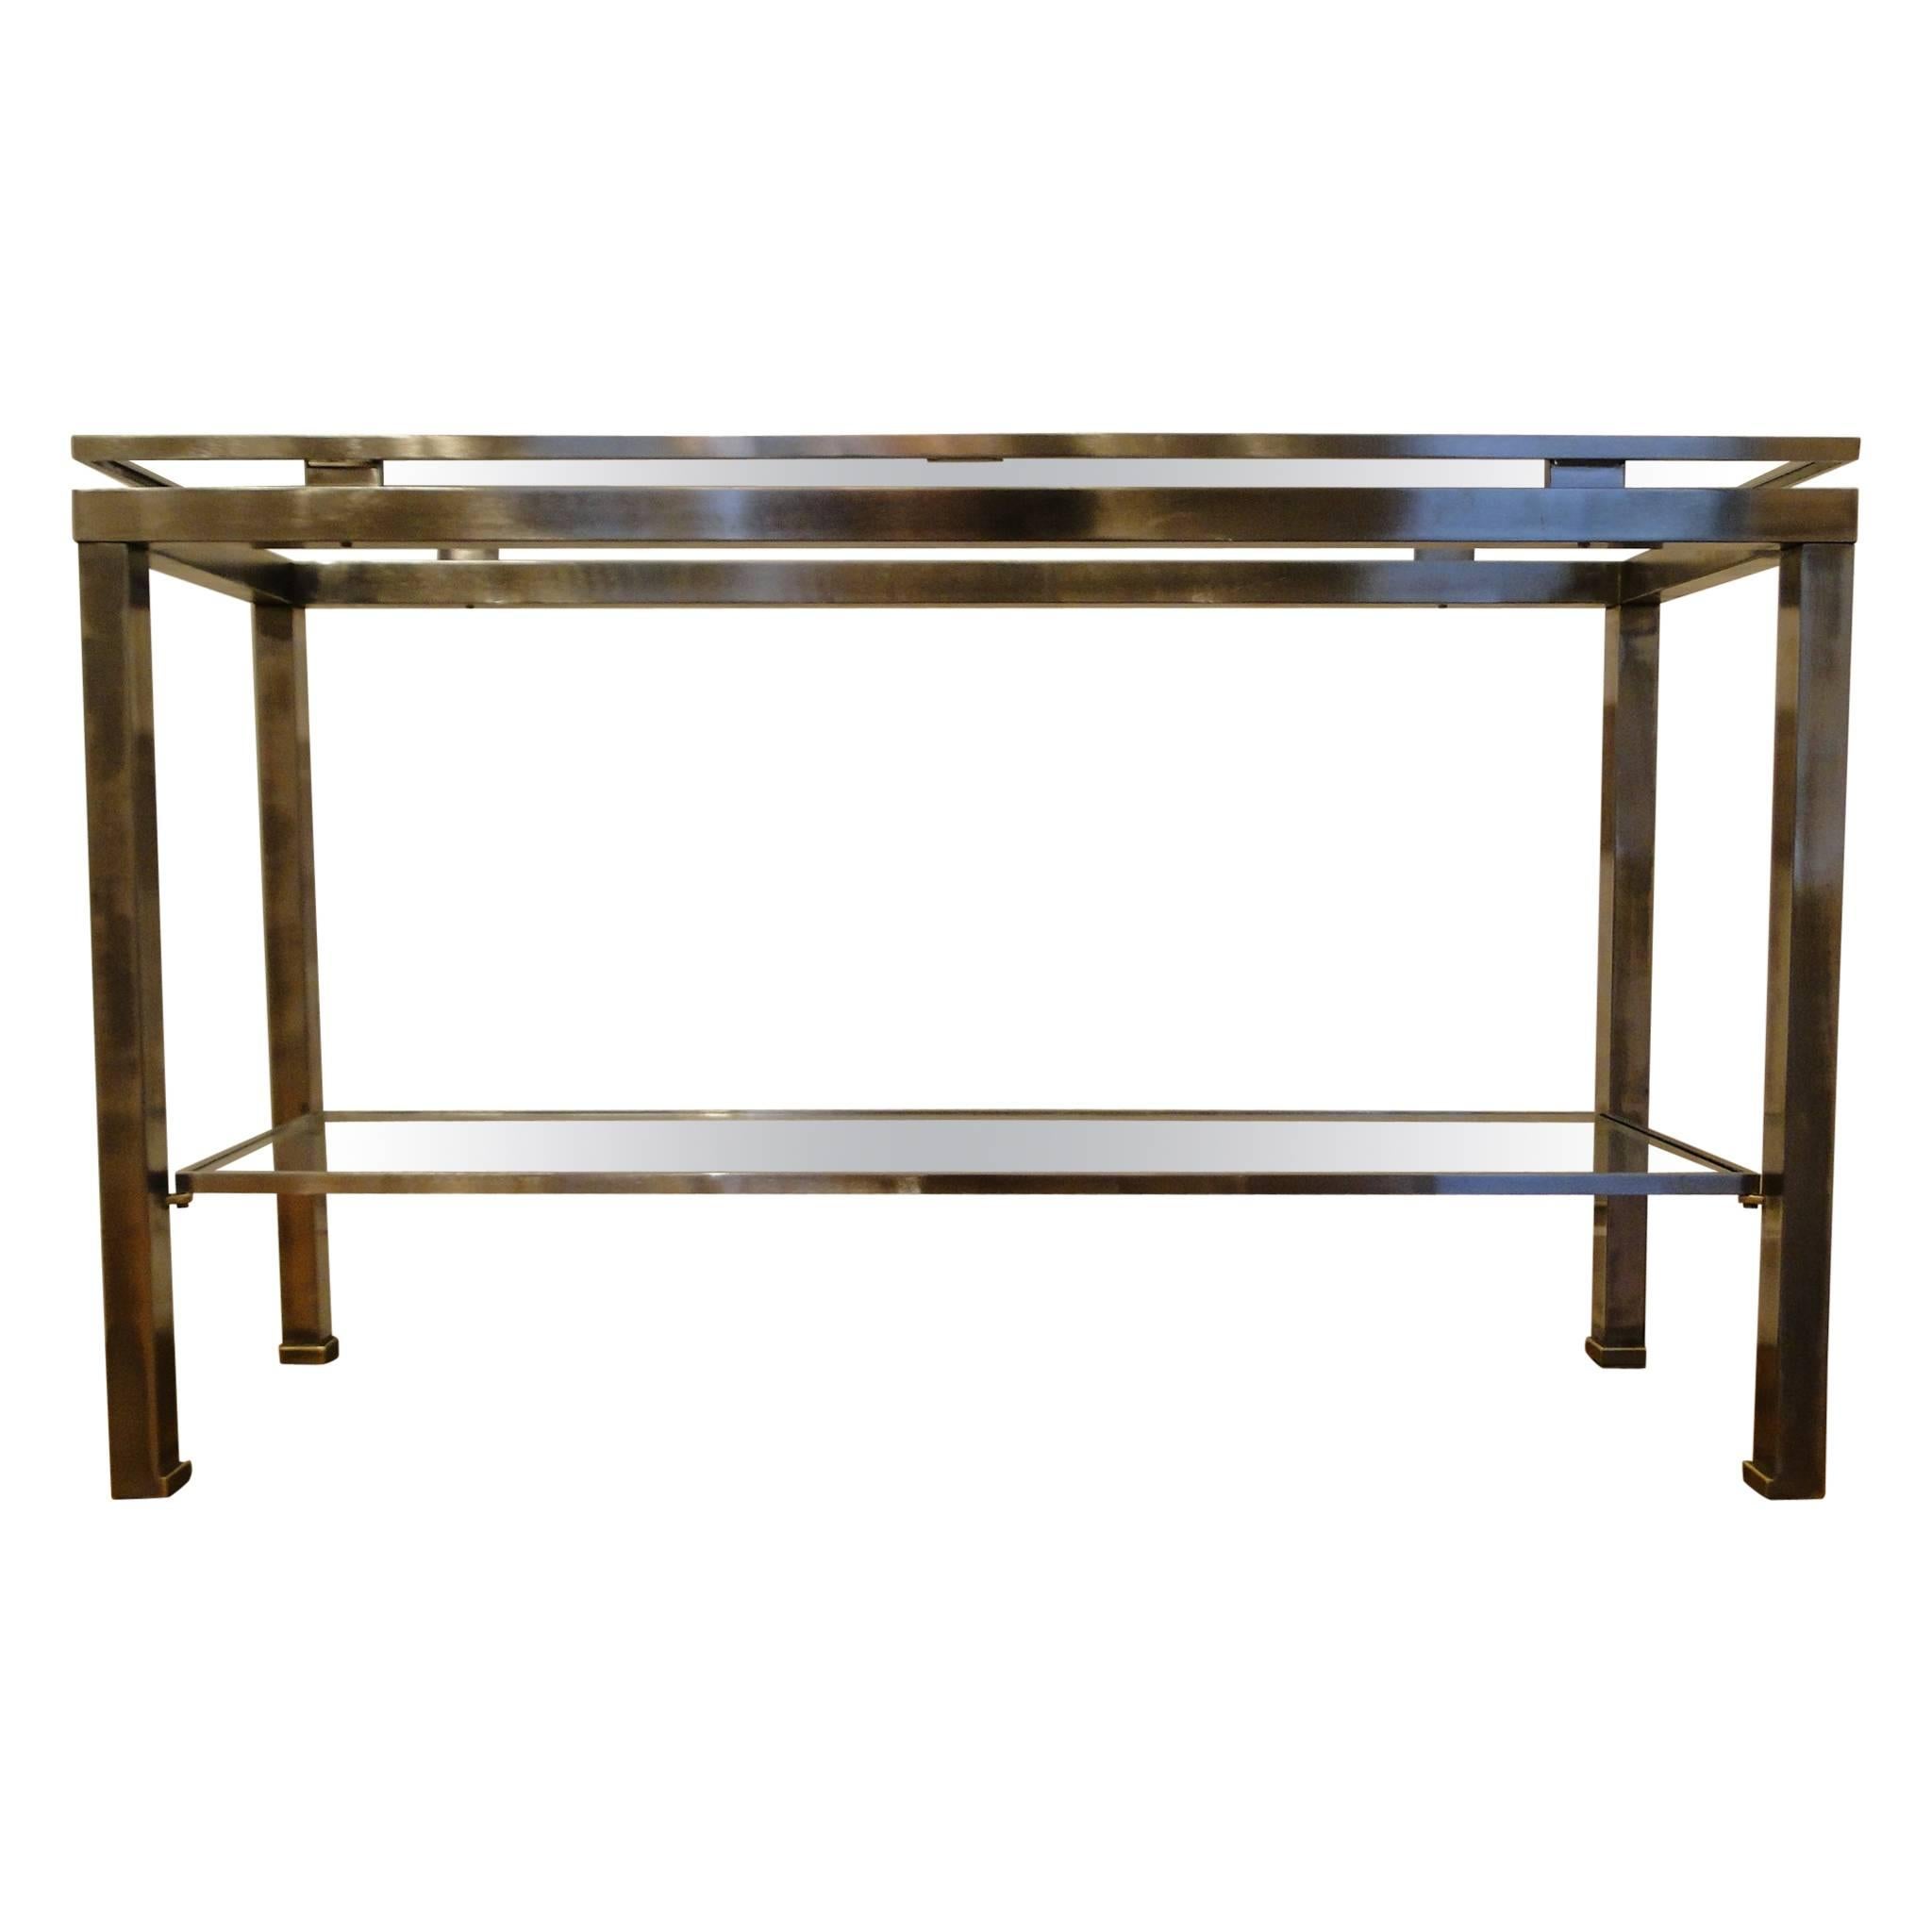 Guy Lefevre, 1970 Stainless Steel Console with Double Tops for Maison Jansen For Sale